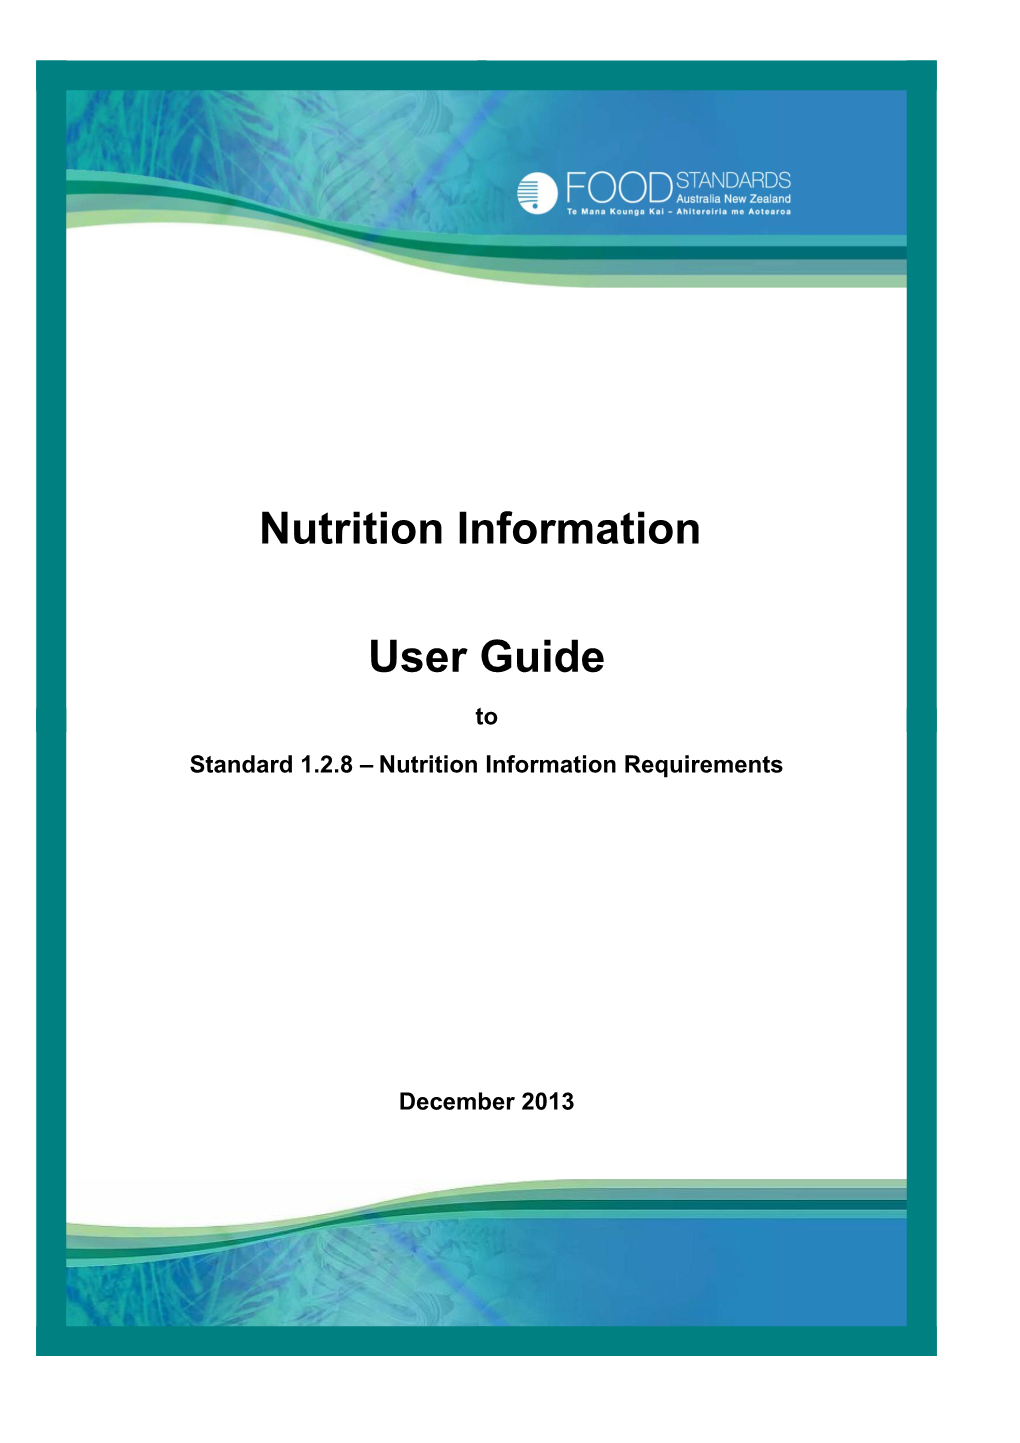 Standard 1.2.8 Nutrition Information Requirements